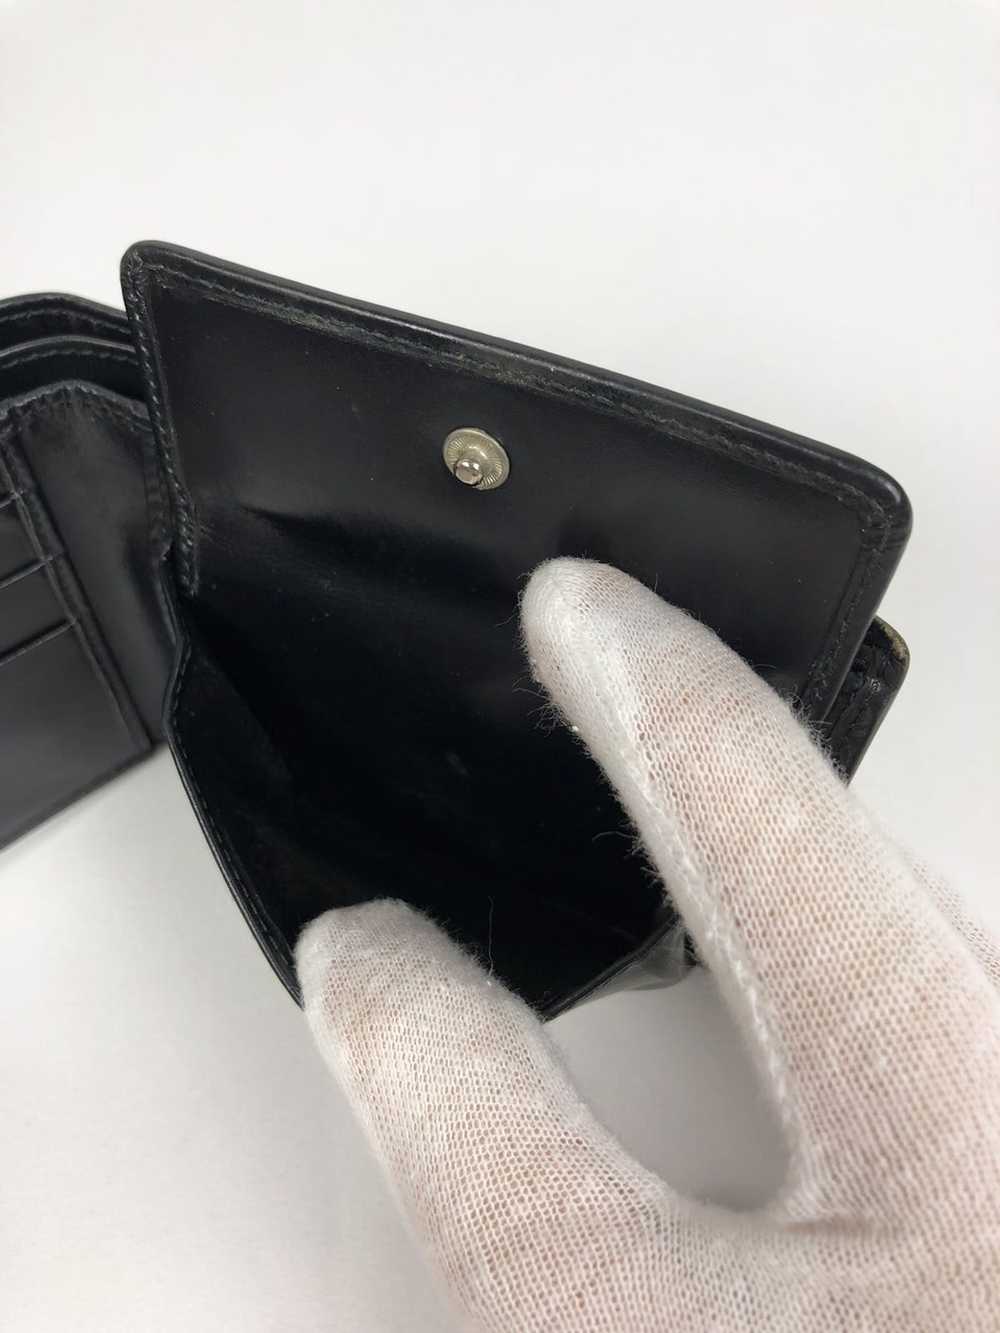 Gucci Gucci G leather bifold wallet - image 7